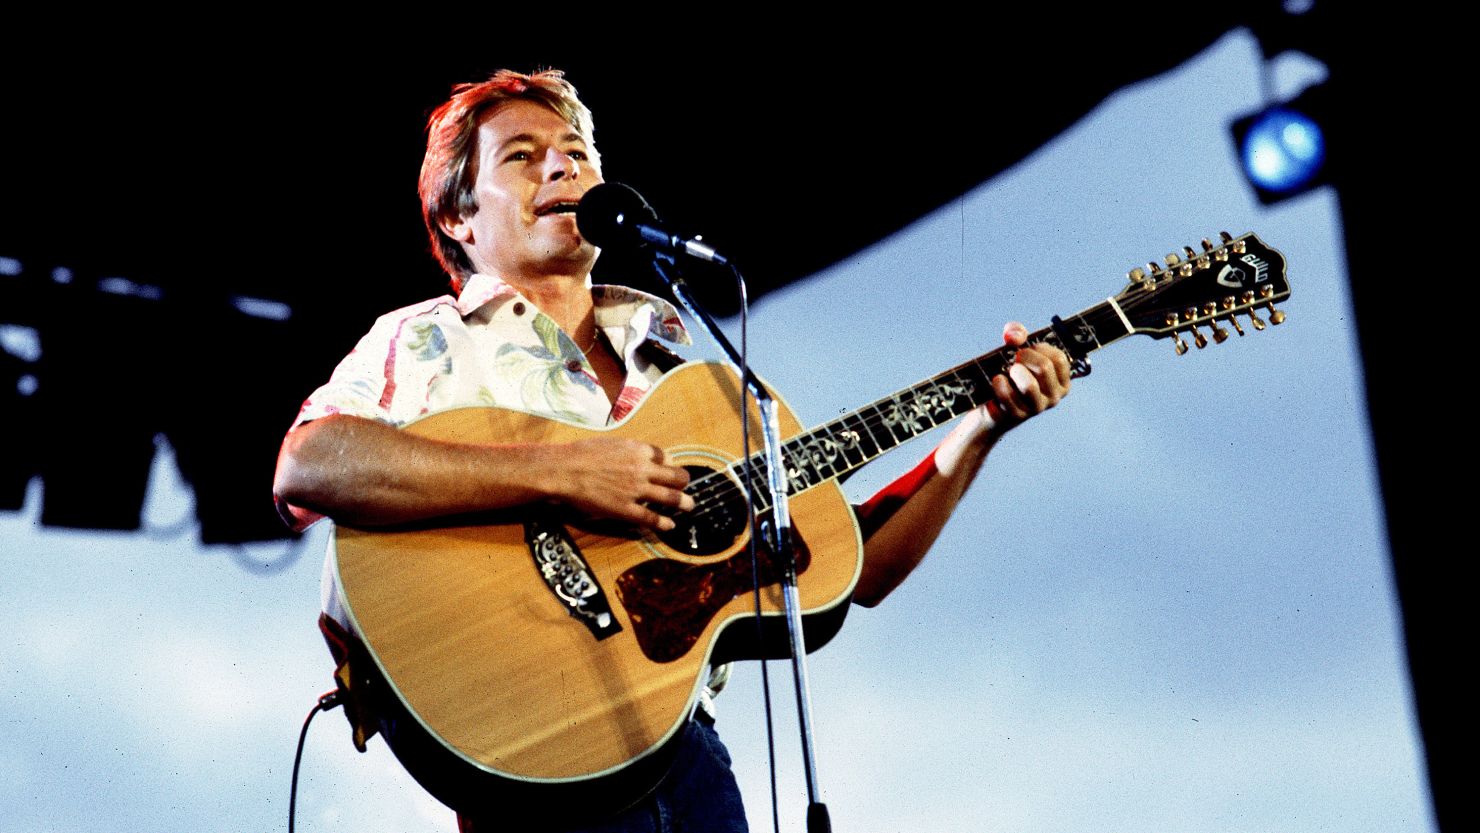 Musician John Denver (1943 - 1997) performs on stage at Chicagofest, Chicago, Illinois, August 9, 1982. 